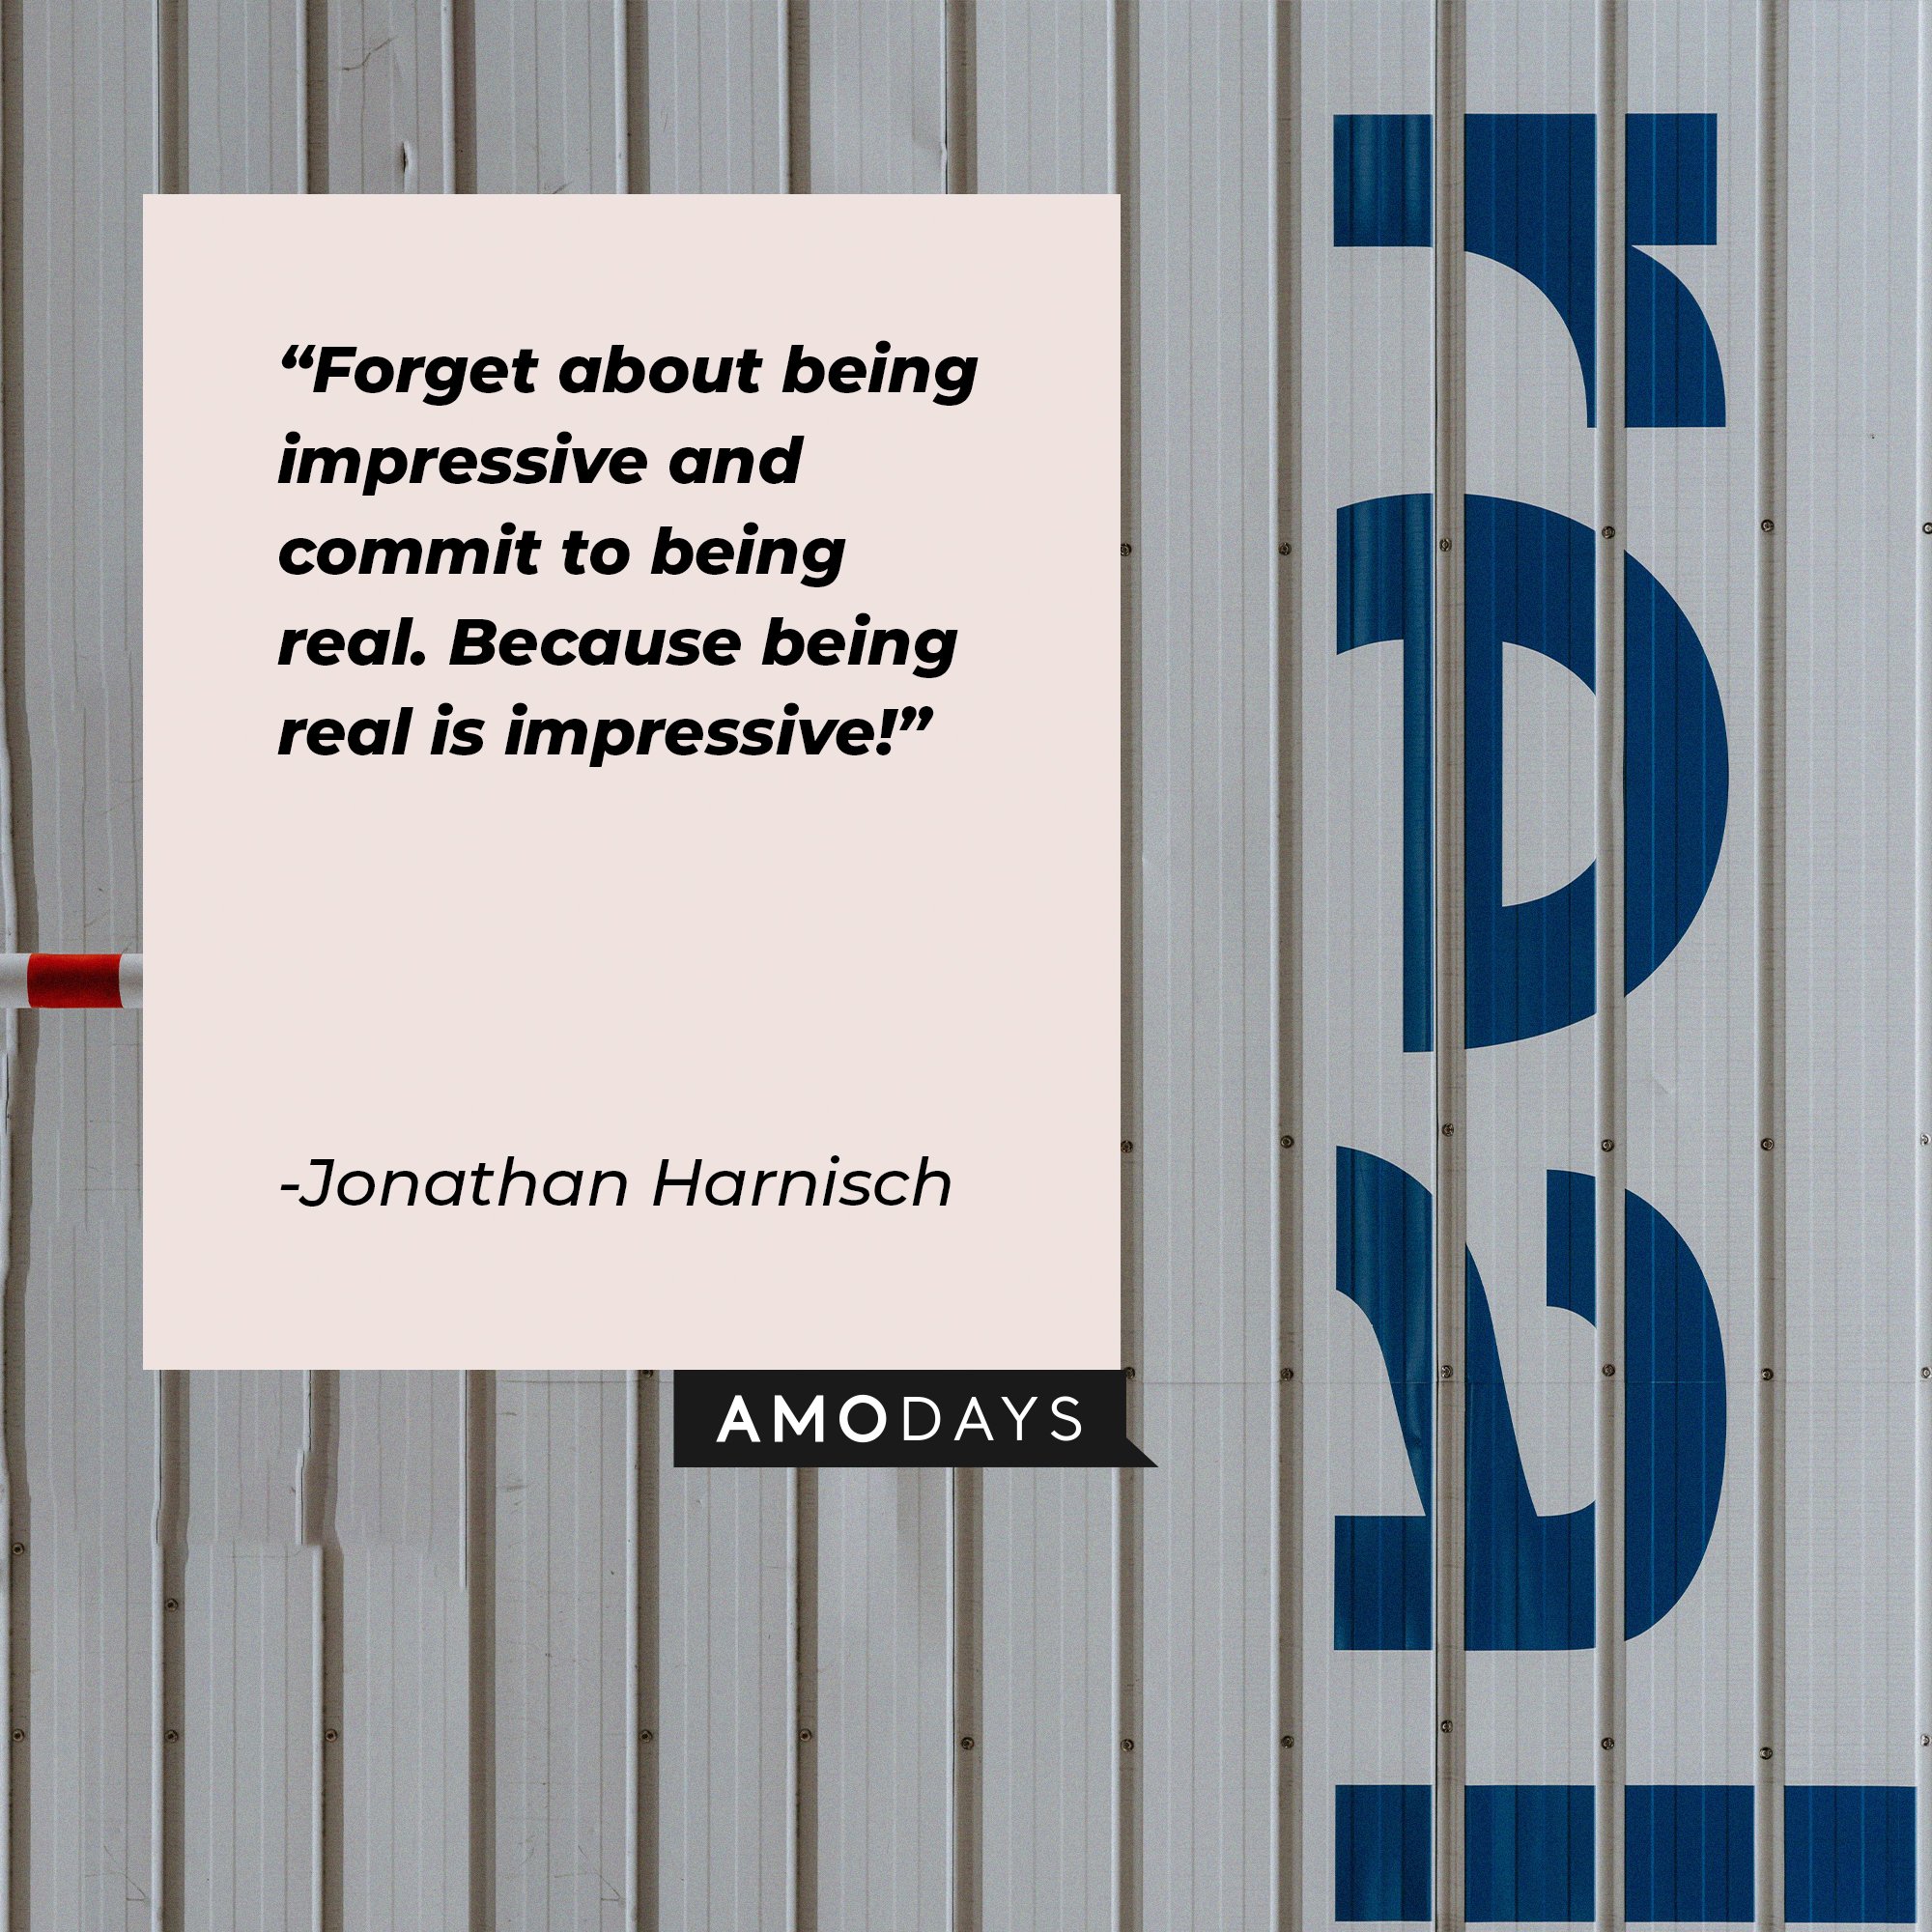 Jonathan Harnisch’s quote: "Forget about being impressive and commit to being real. Because being real is impressive!" | Image: AmoDays